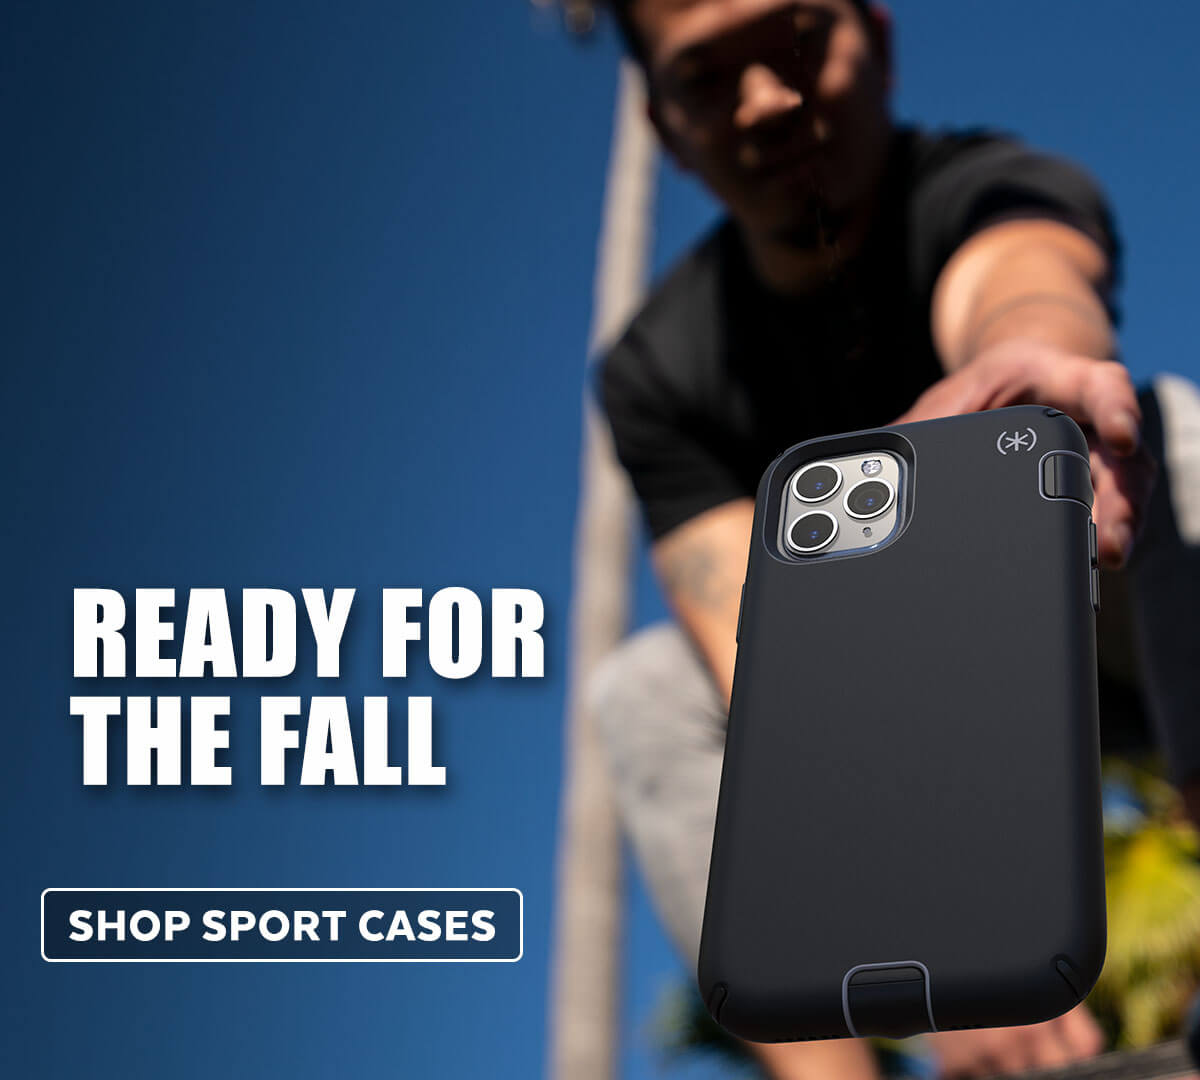 Ready for the fall. Shop Sport cases